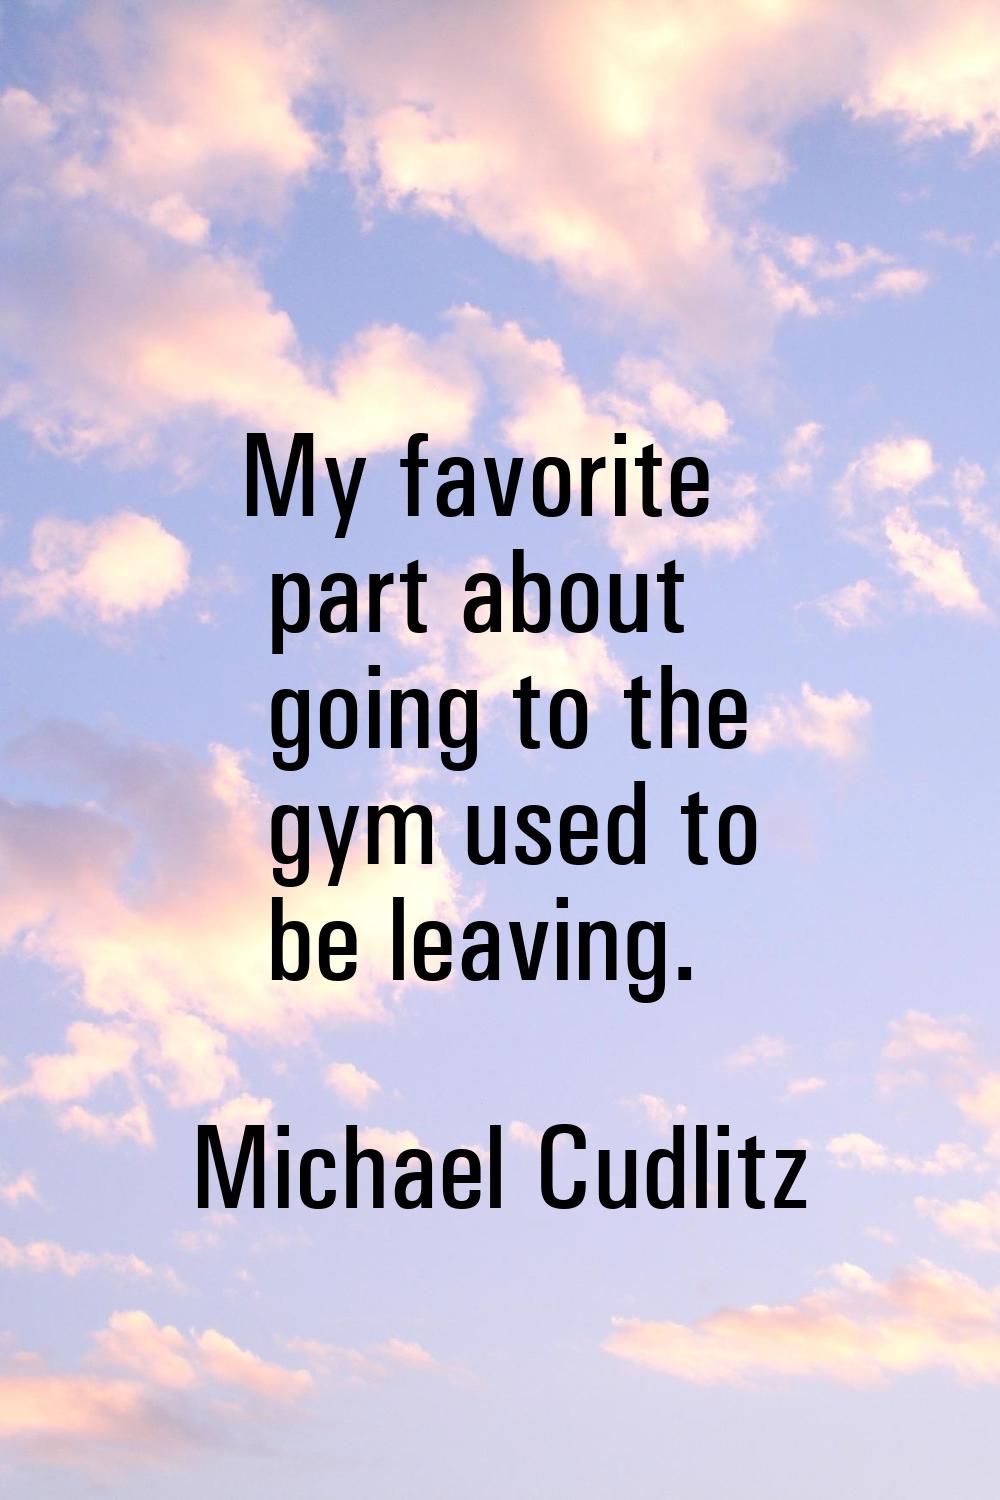 My favorite part about going to the gym used to be leaving.